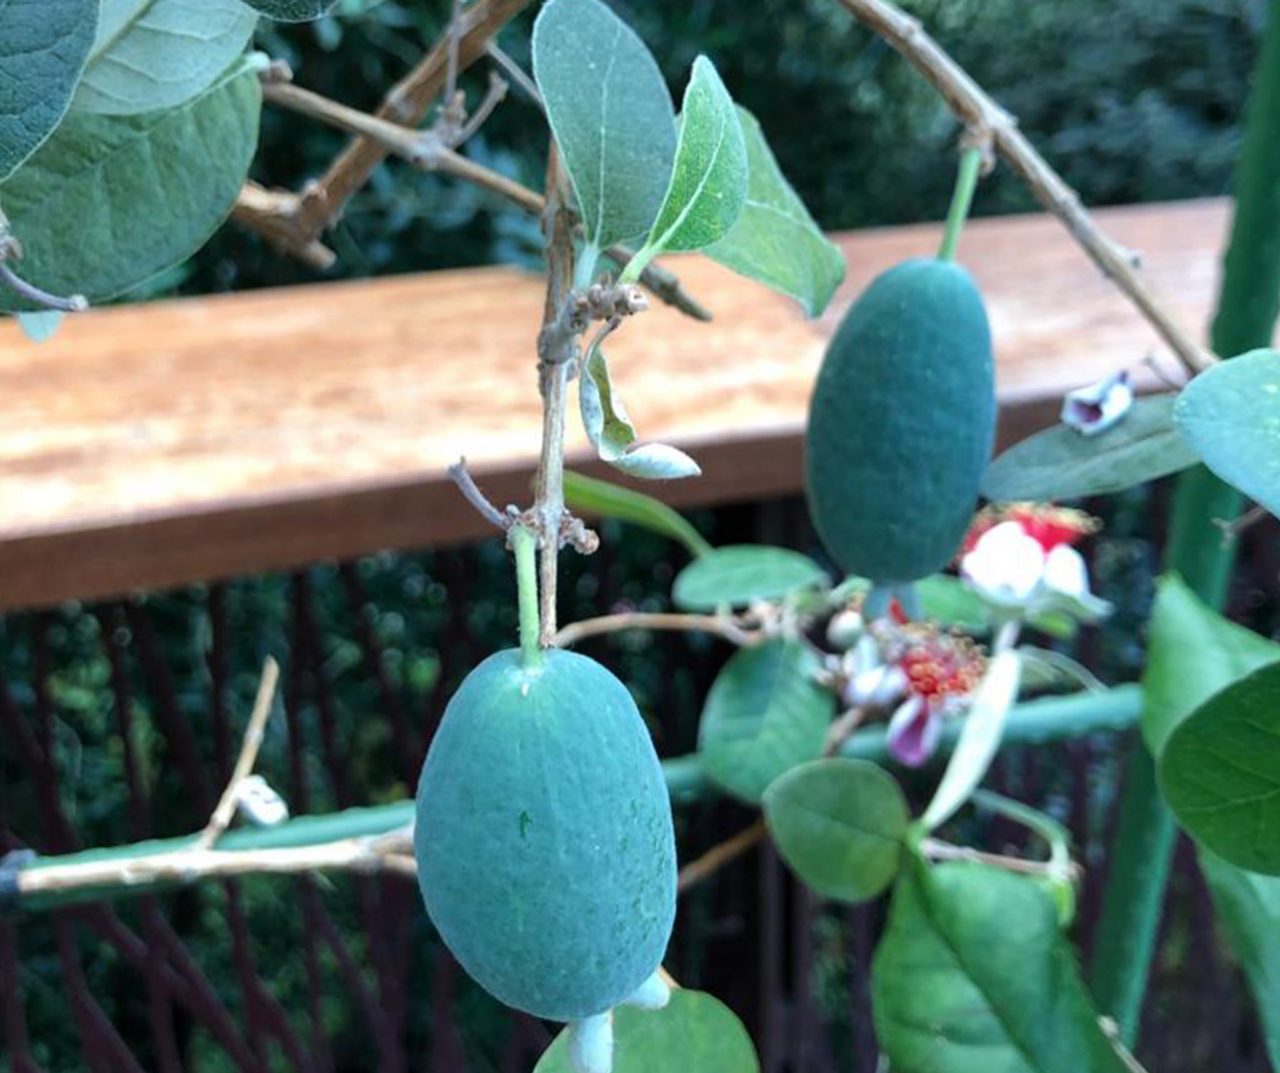 Fruit of Feijoa sellowiana produced in the Flower Dome’s California Garden.